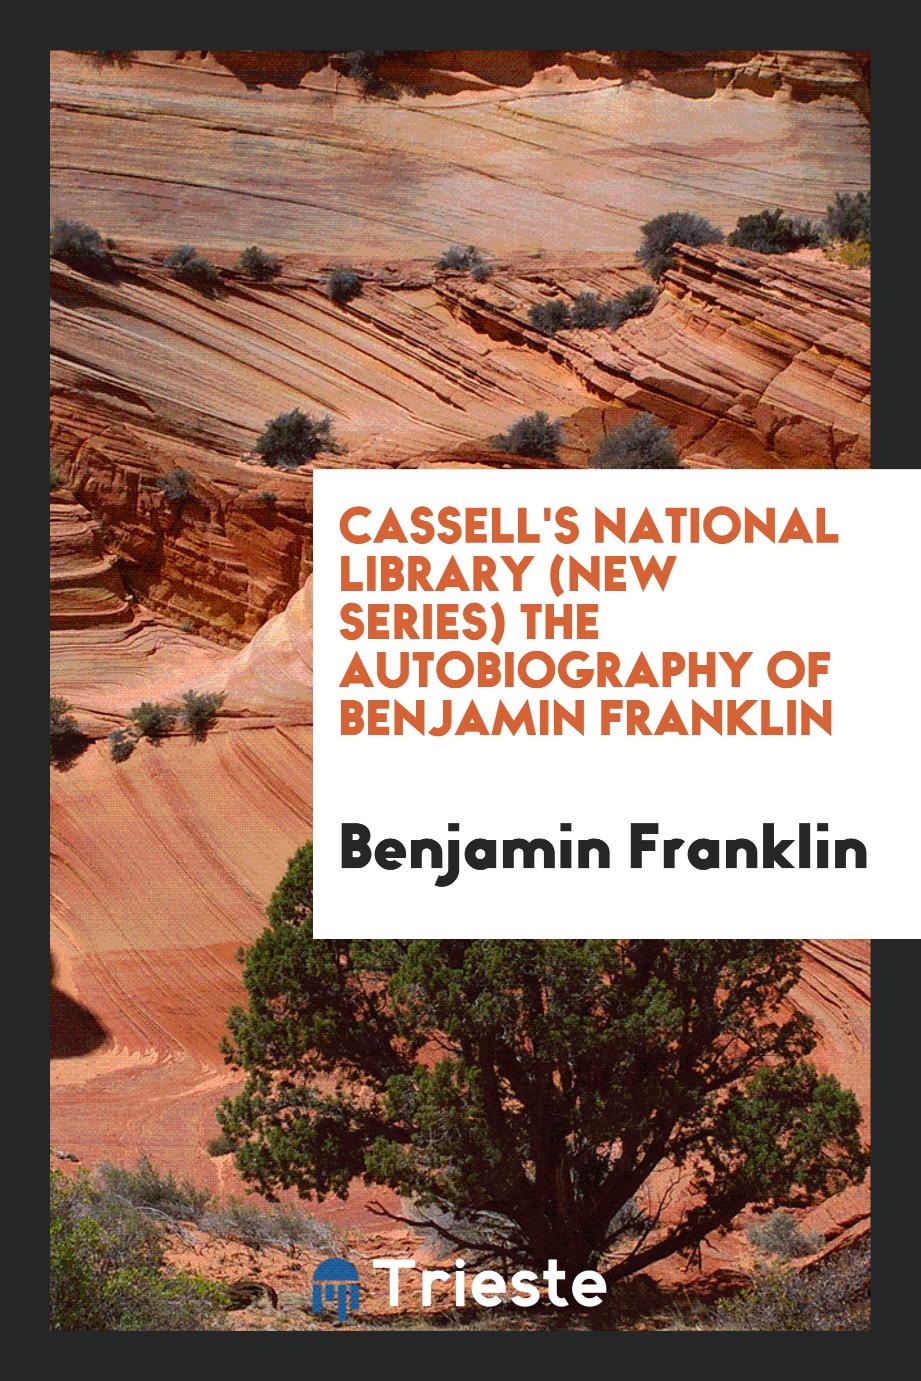 Cassell's National Library (New Series) the Autobiography of Benjamin Franklin